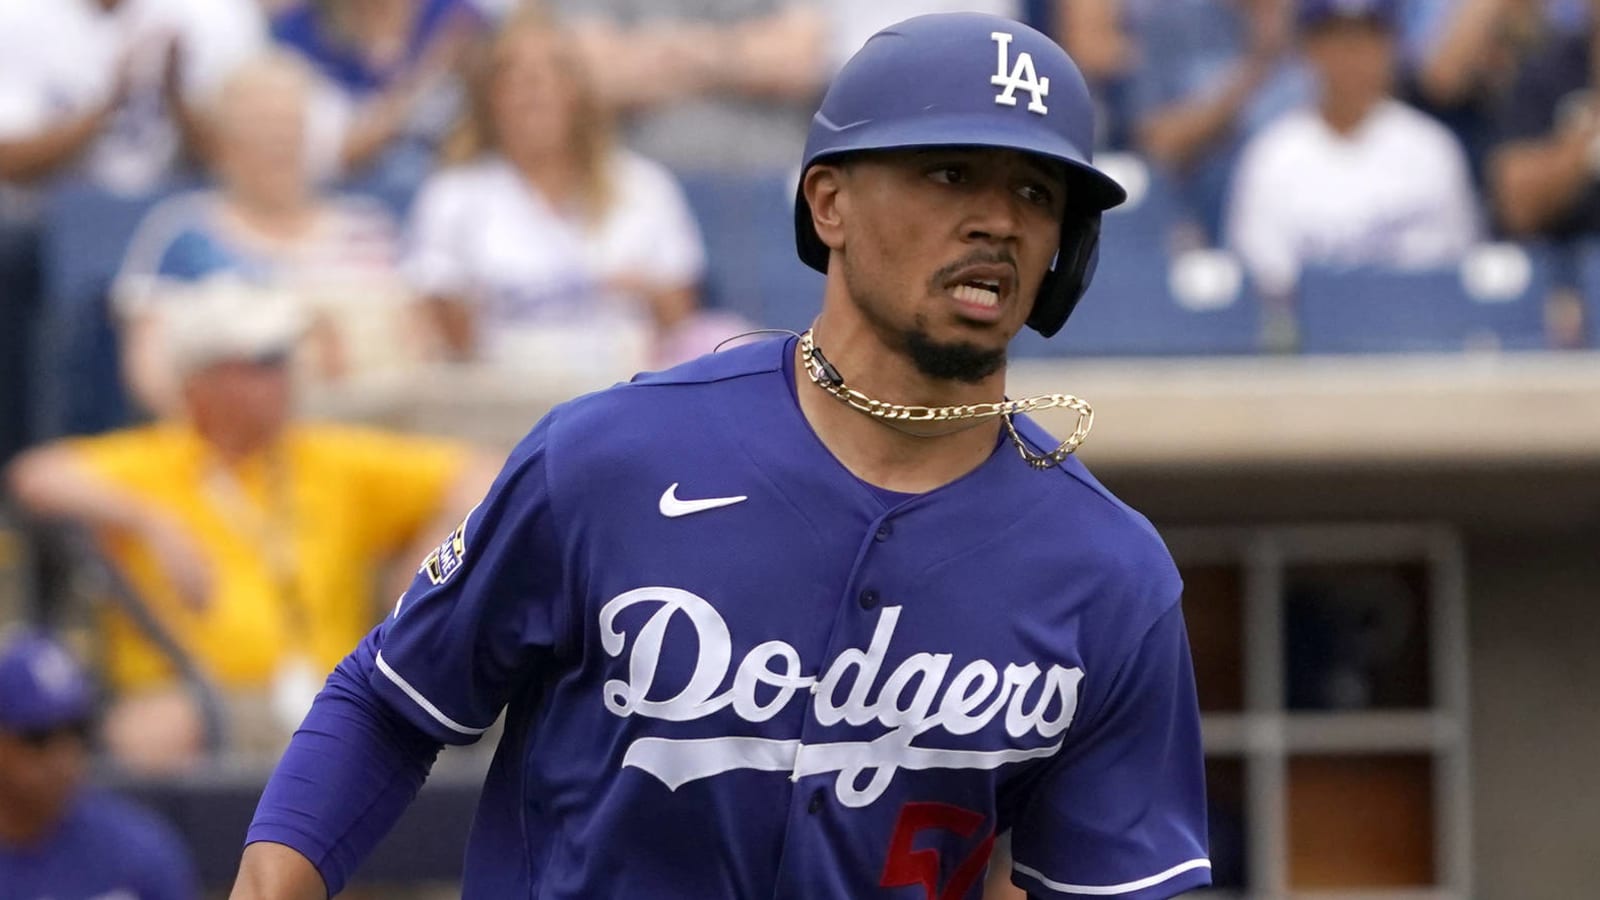 Twitter reacts to Dodgers signing Mookie Betts to 12-year extension